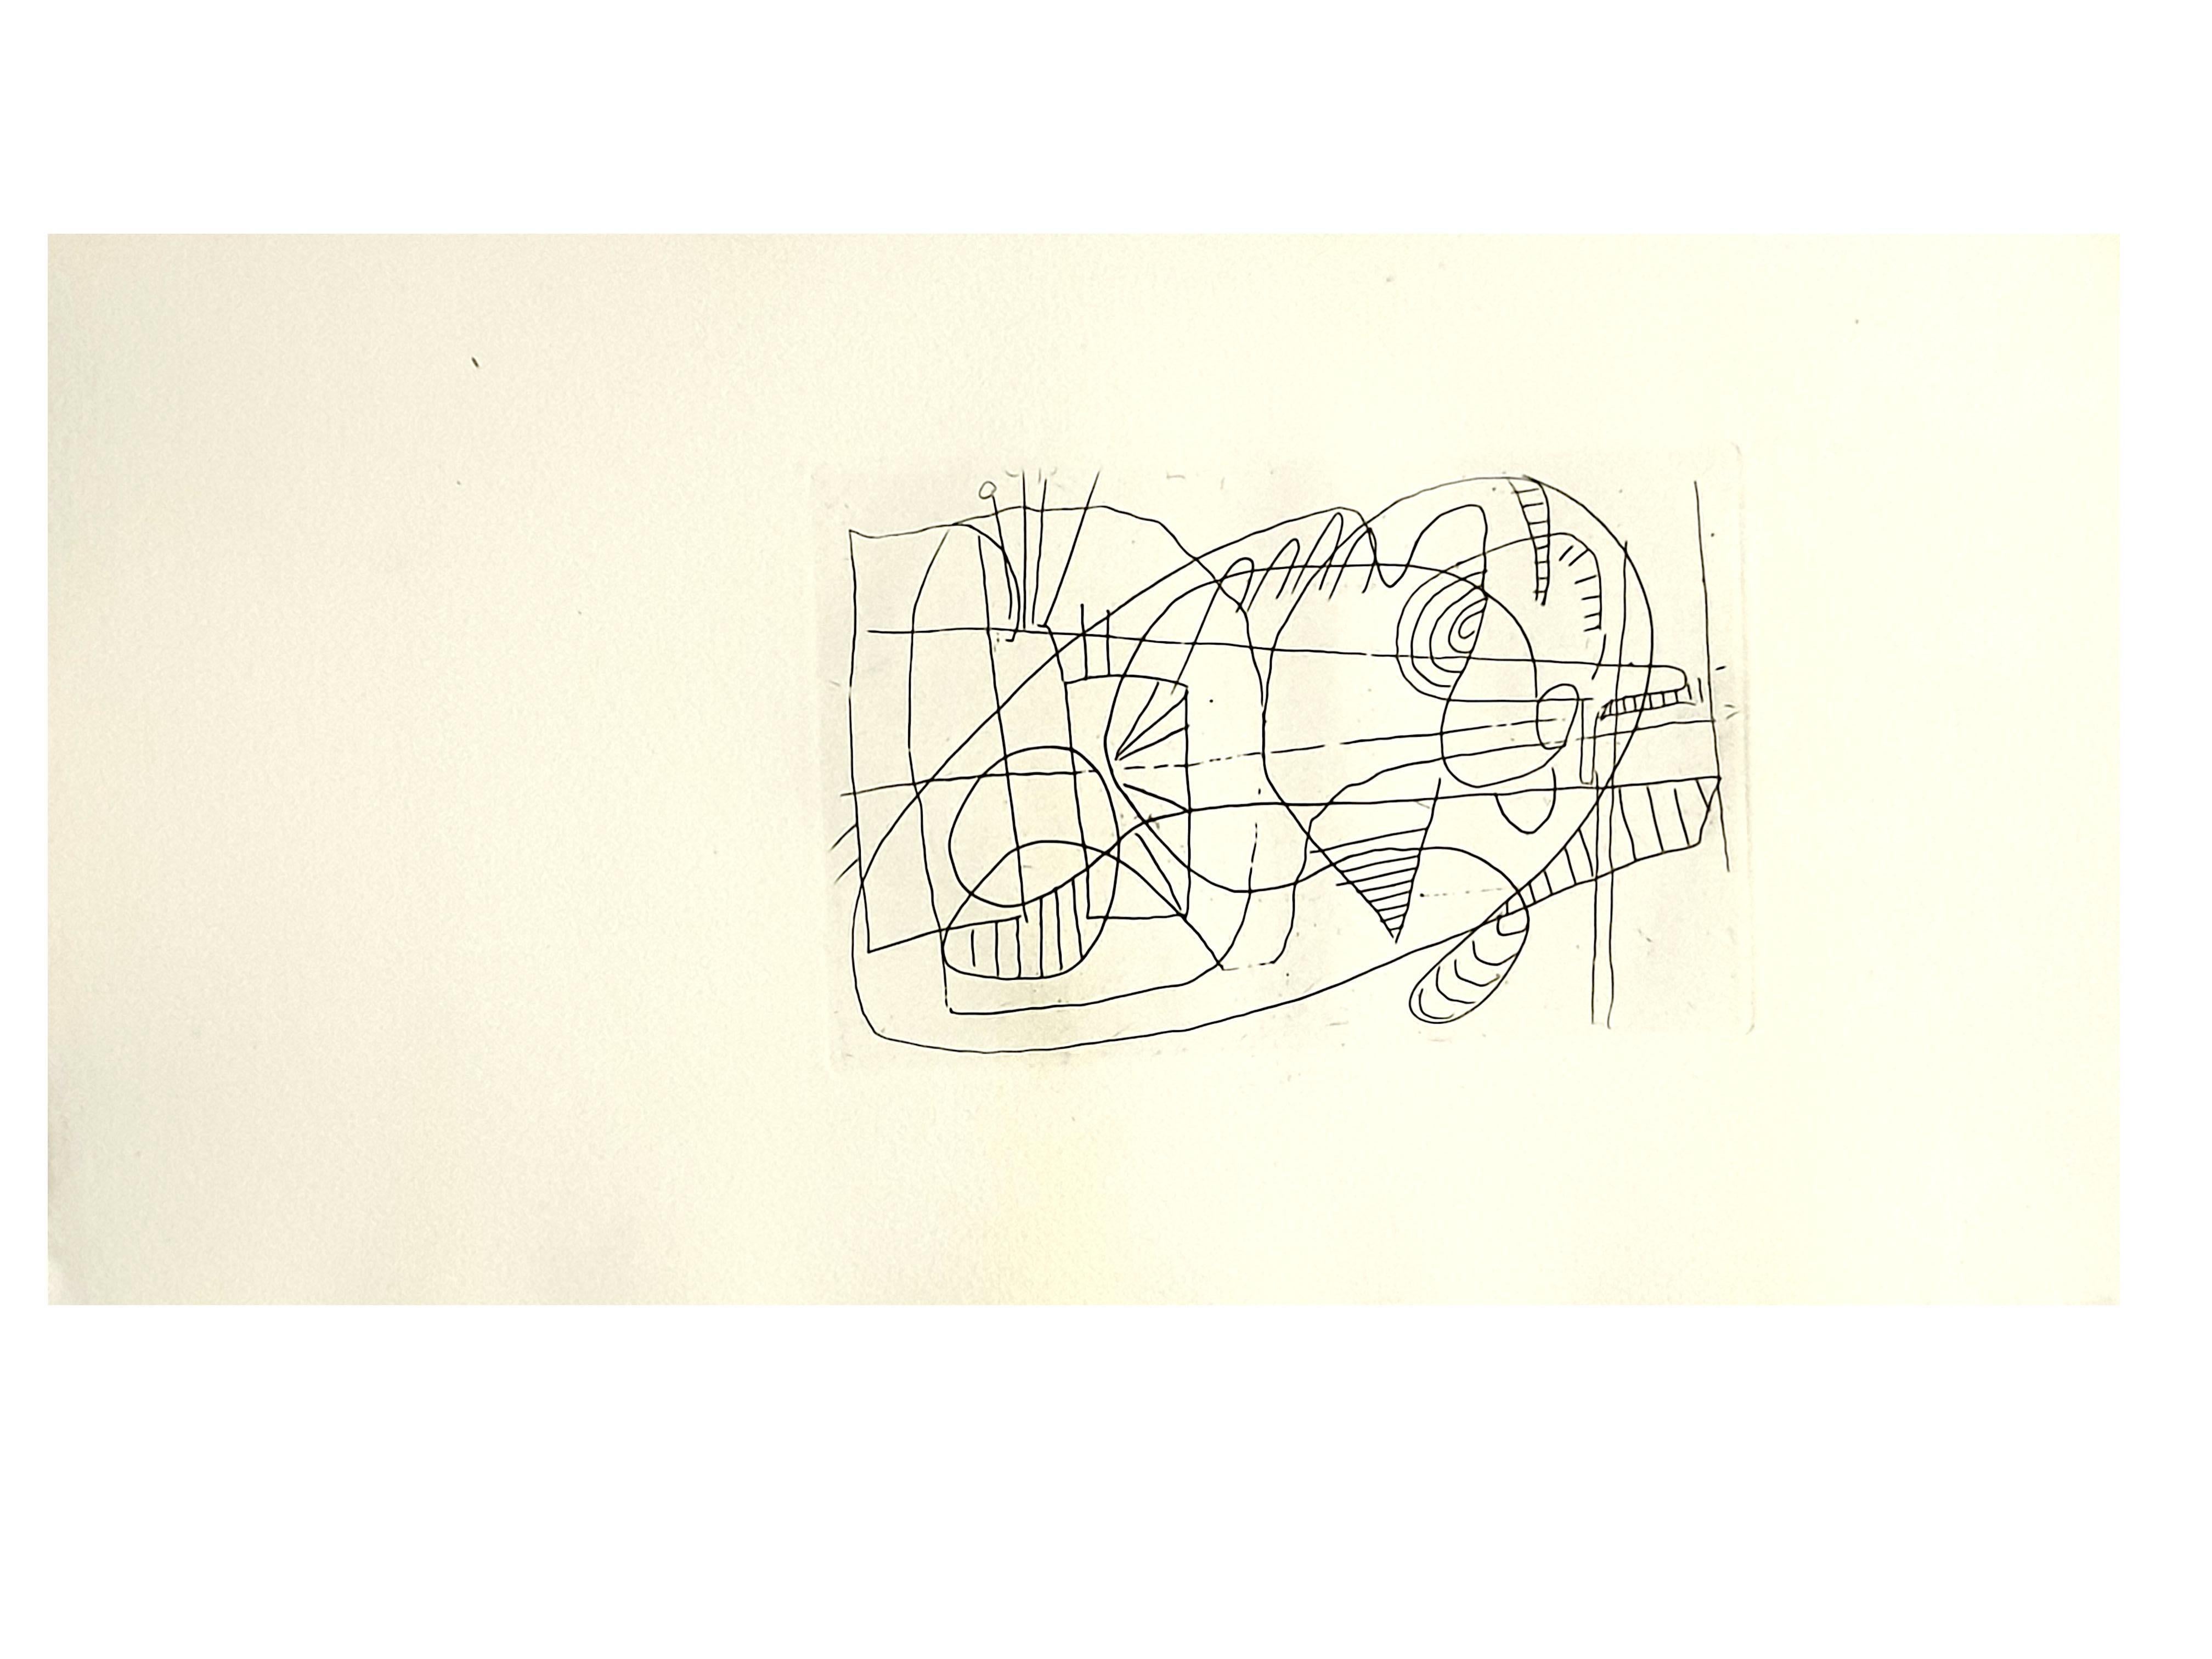 André Lanskoy - Composition - Original Etching
From Dédale
Edition: 190
Dimensions: 32 x 18 cm
This etching is from the first series of etching Lanskoy made. 
Unsigned and unumbered as issued